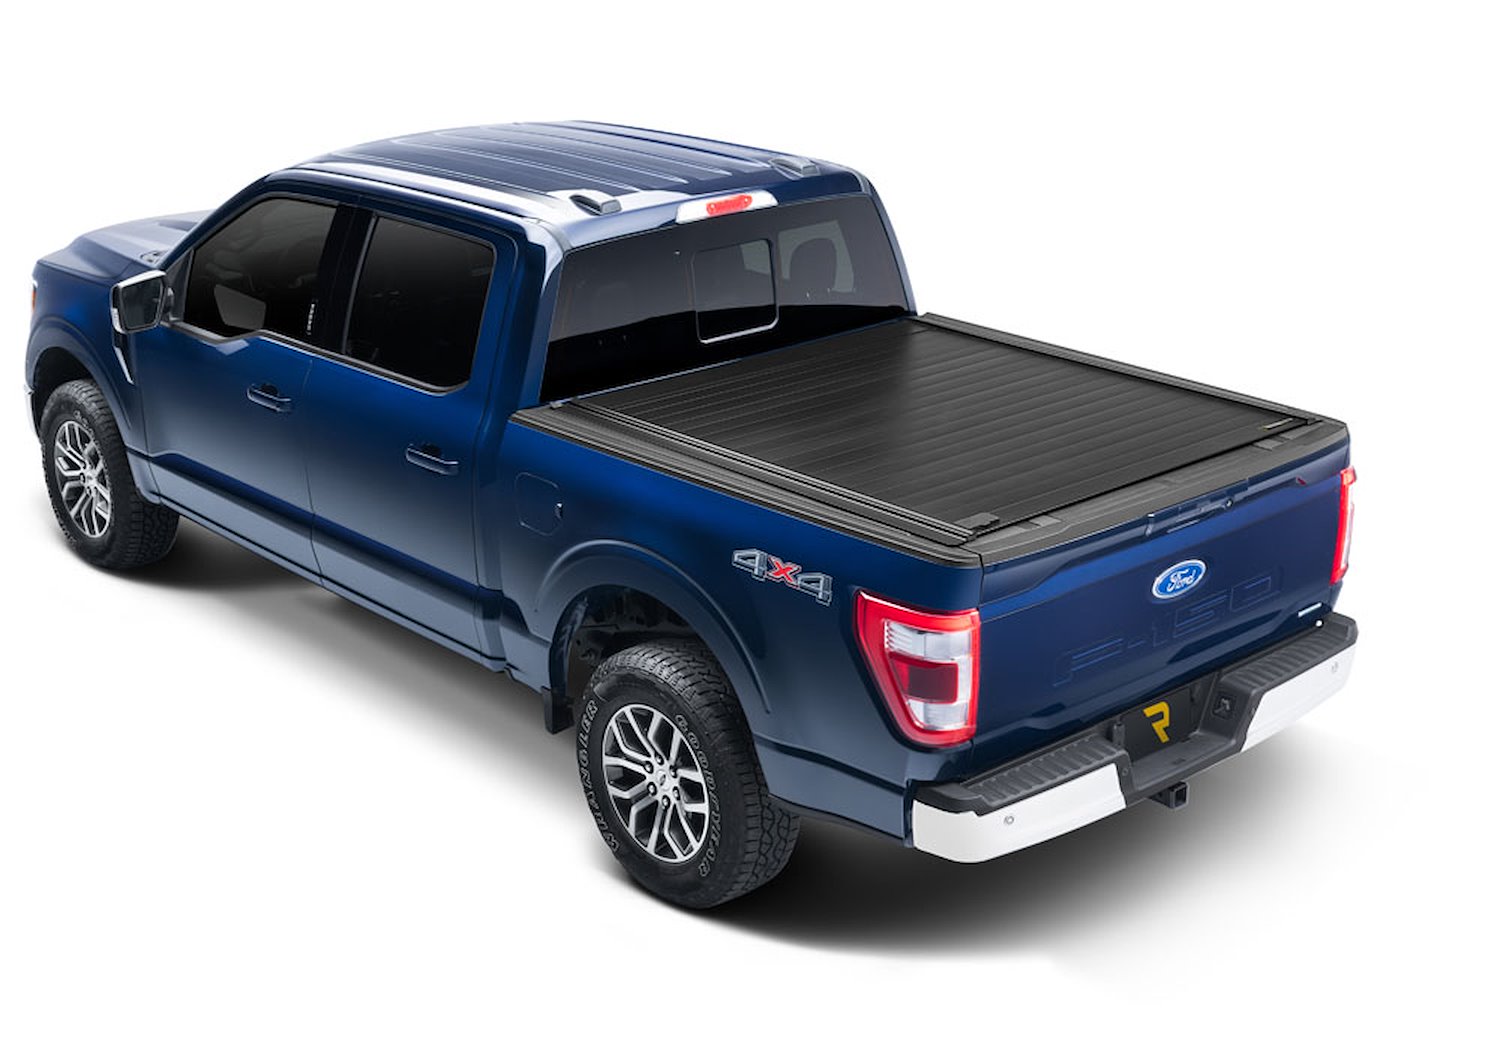 80375 RetraxPRO MX Retractable Tonneau Cover Fits Select Ford F-150 8' 2" Bed without Stake Pockets